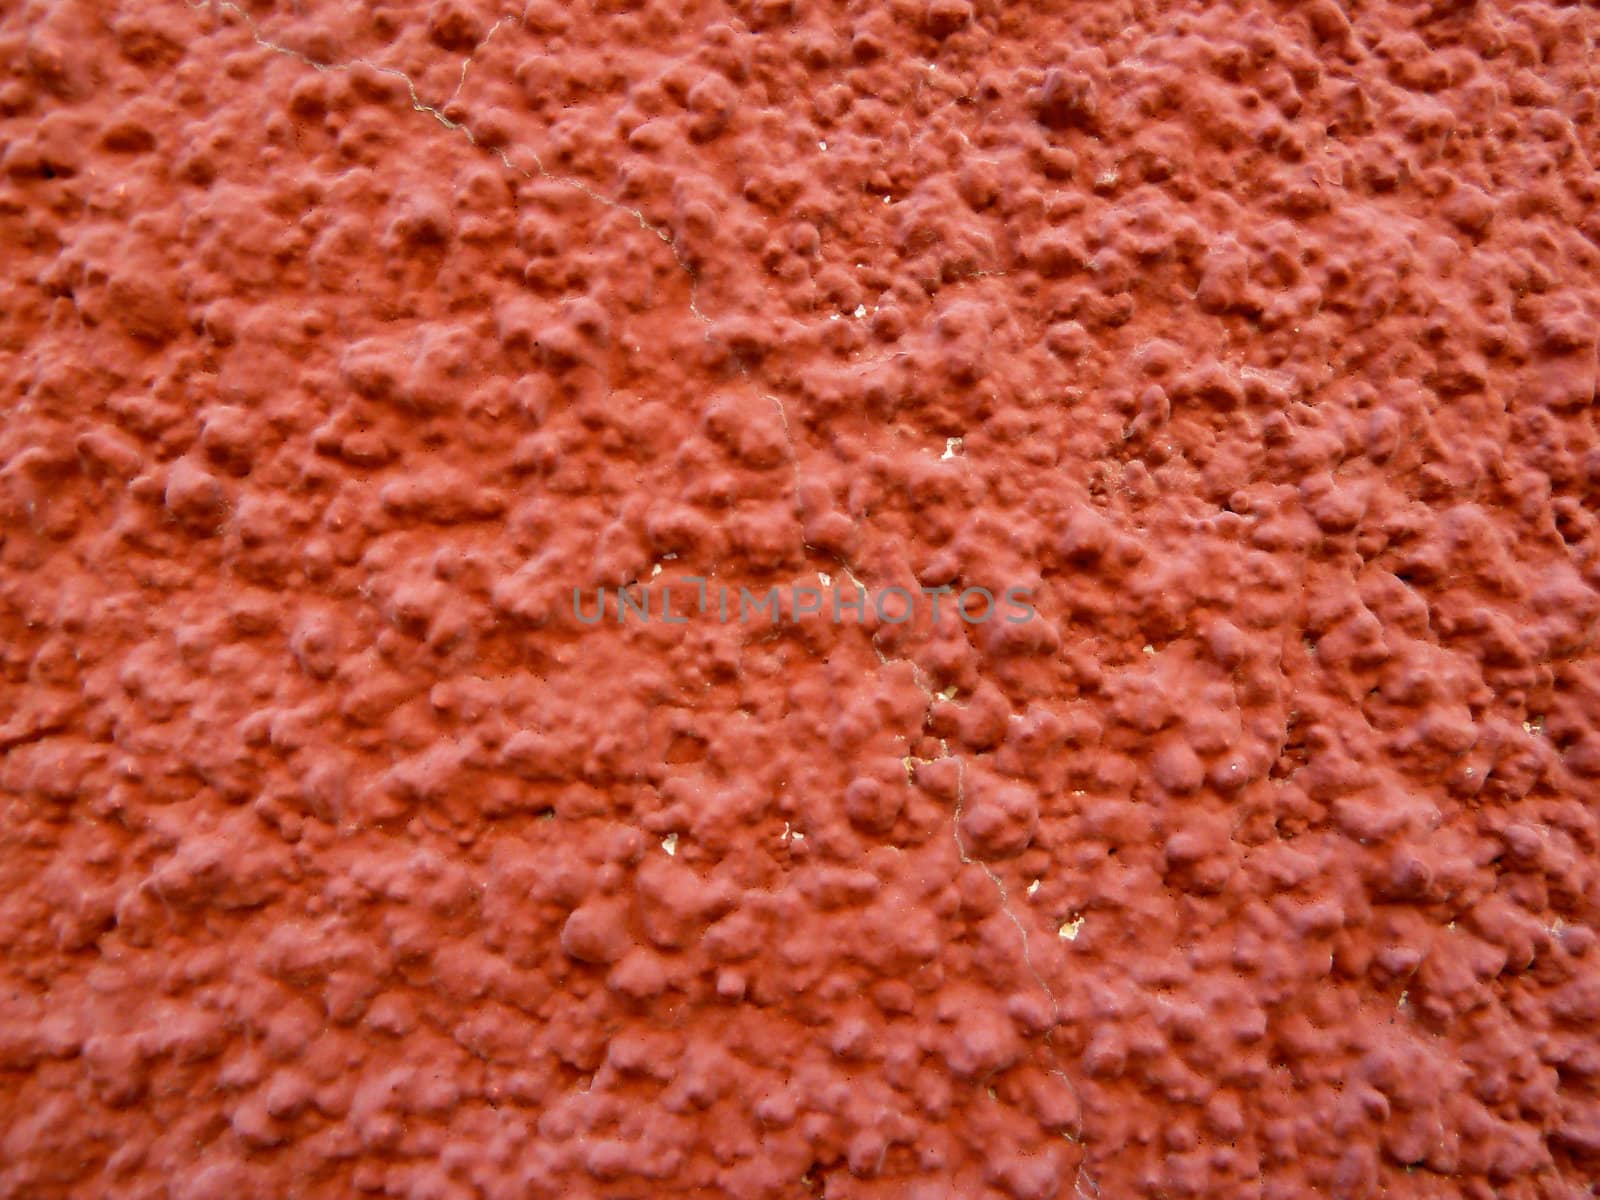 closeup on a section of a red textured surface